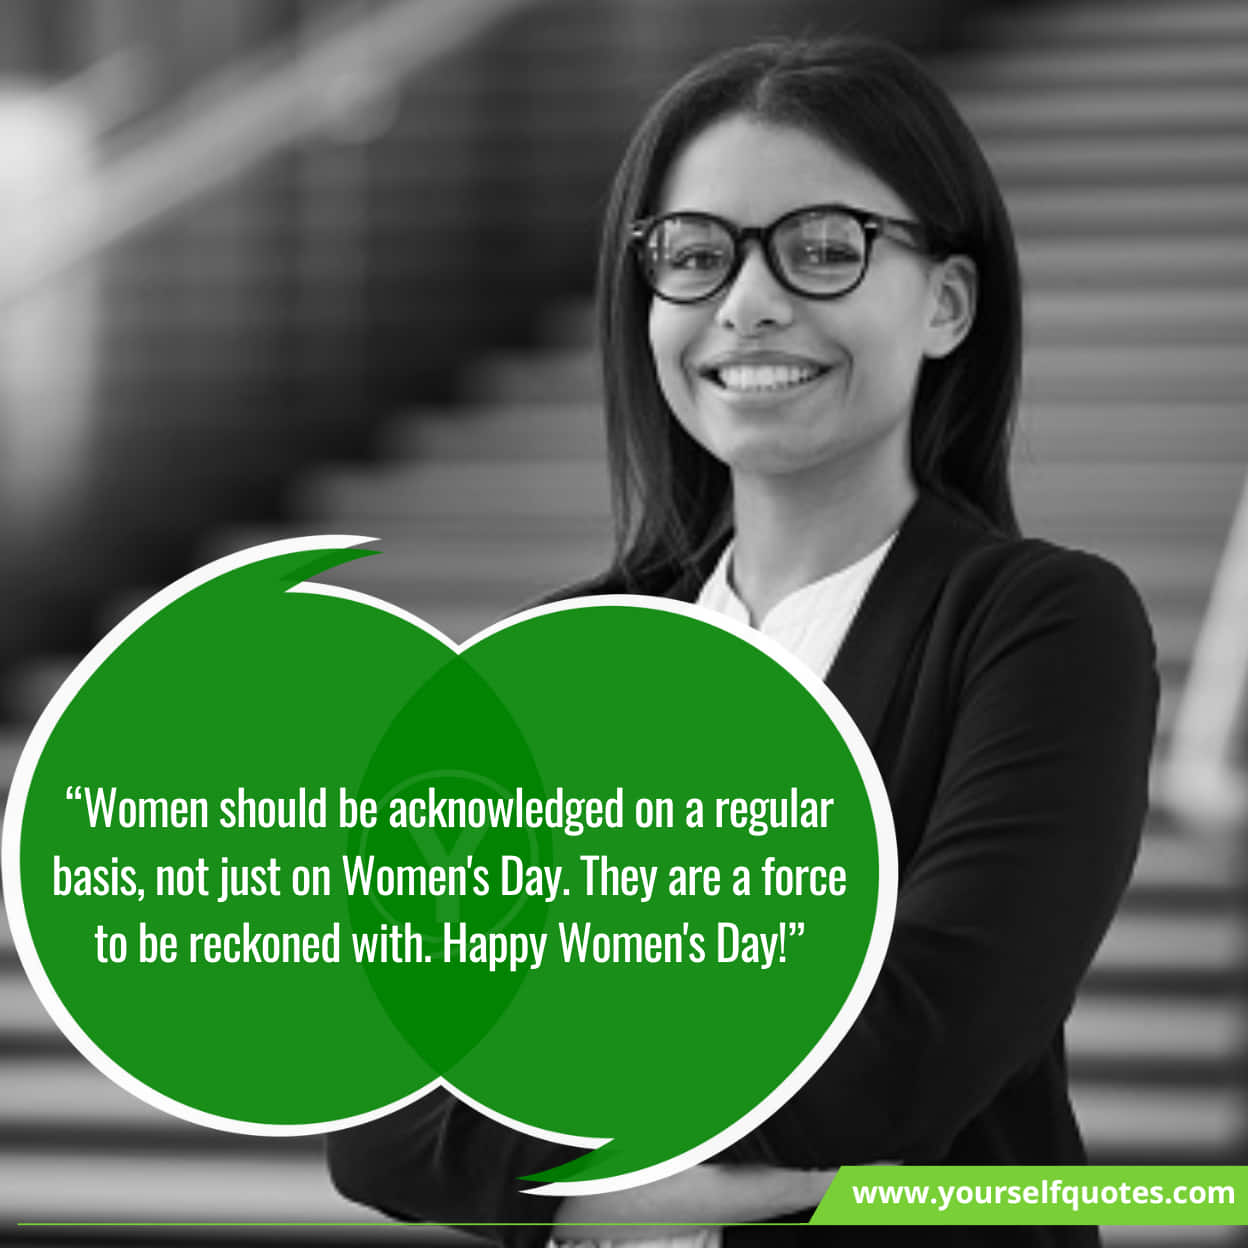 Inspiring Wishes For Employees On Women's Day